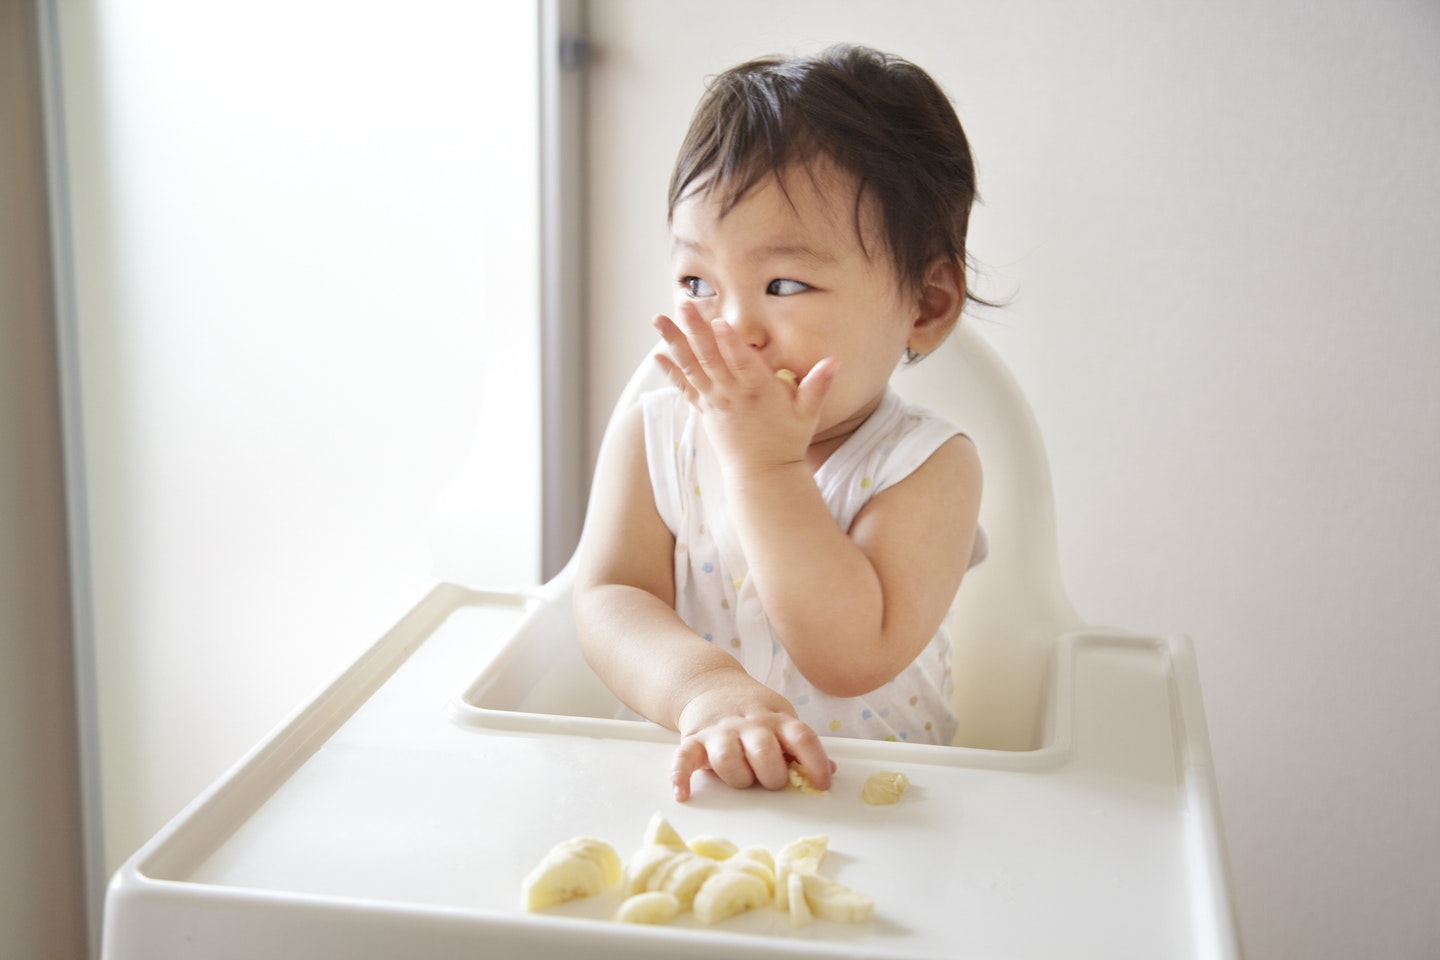 A baby boy eating banana in a high chair